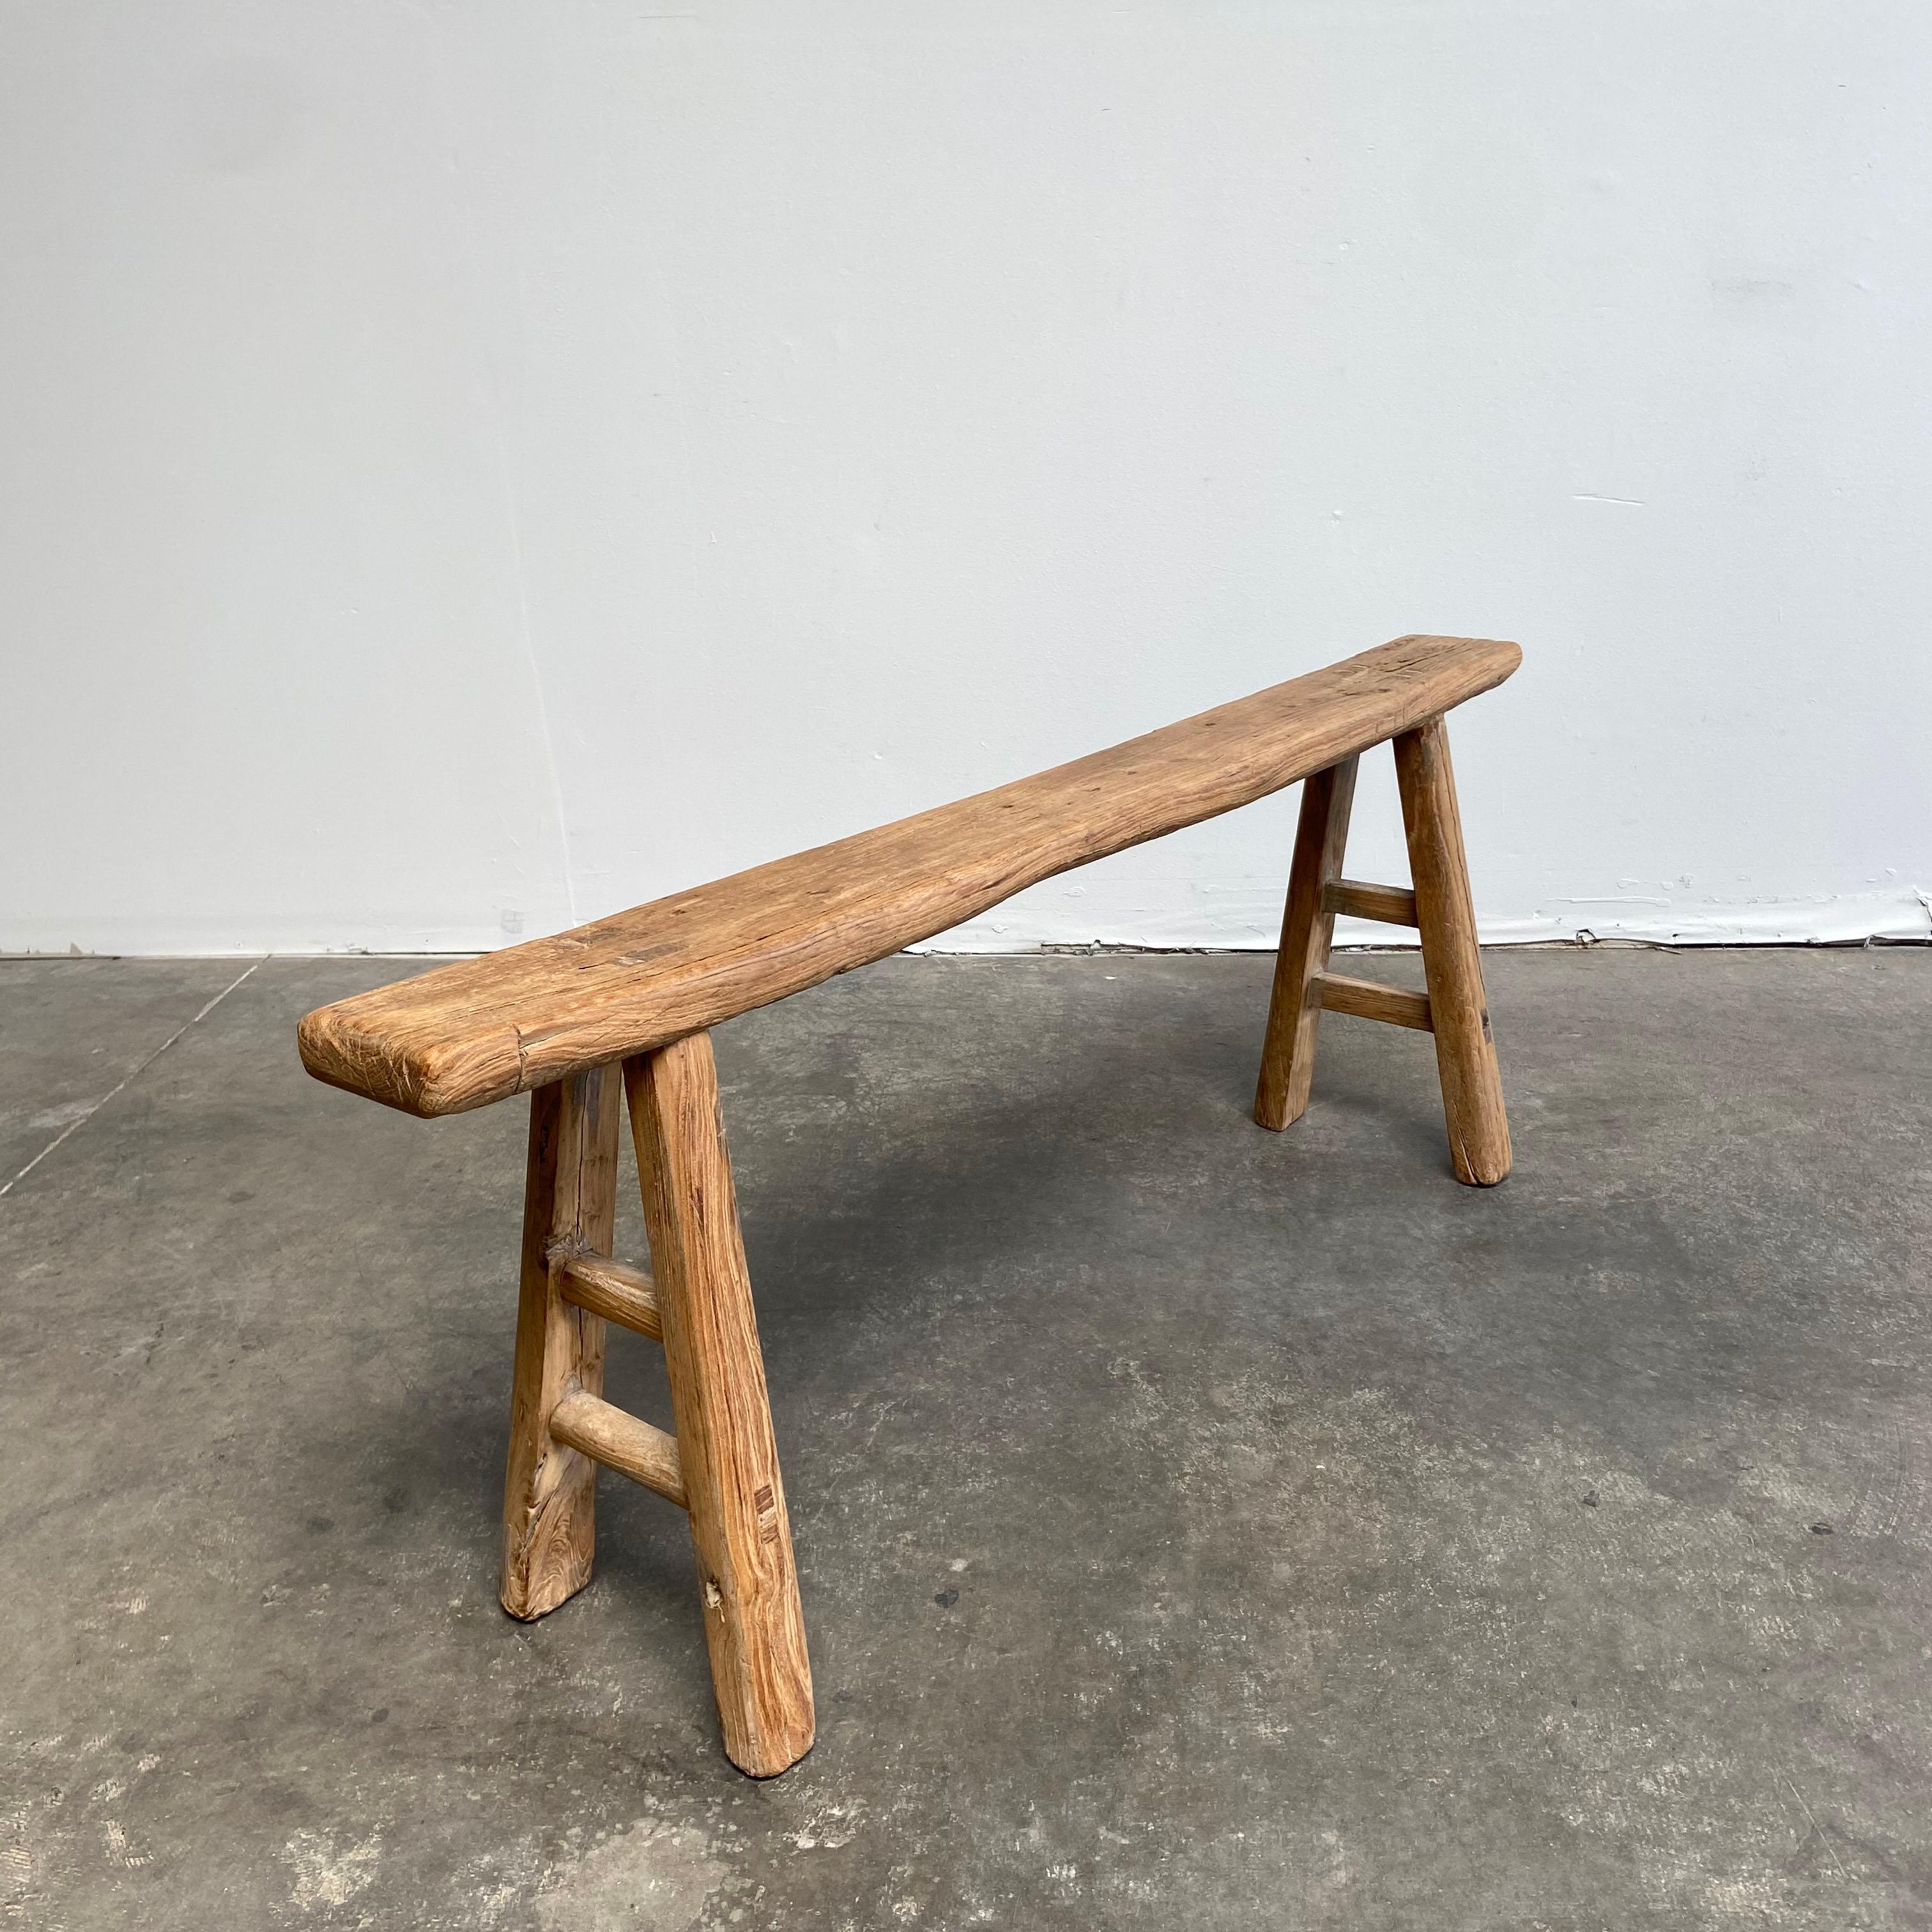 Vintage antique elm wood bench.
These are the real vintage antique elm wood benches! Beautiful antique patina, with weathering and age, these are solid and sturdy ready for daily use, use as a table behind a sofa, stool, coffee table, they are